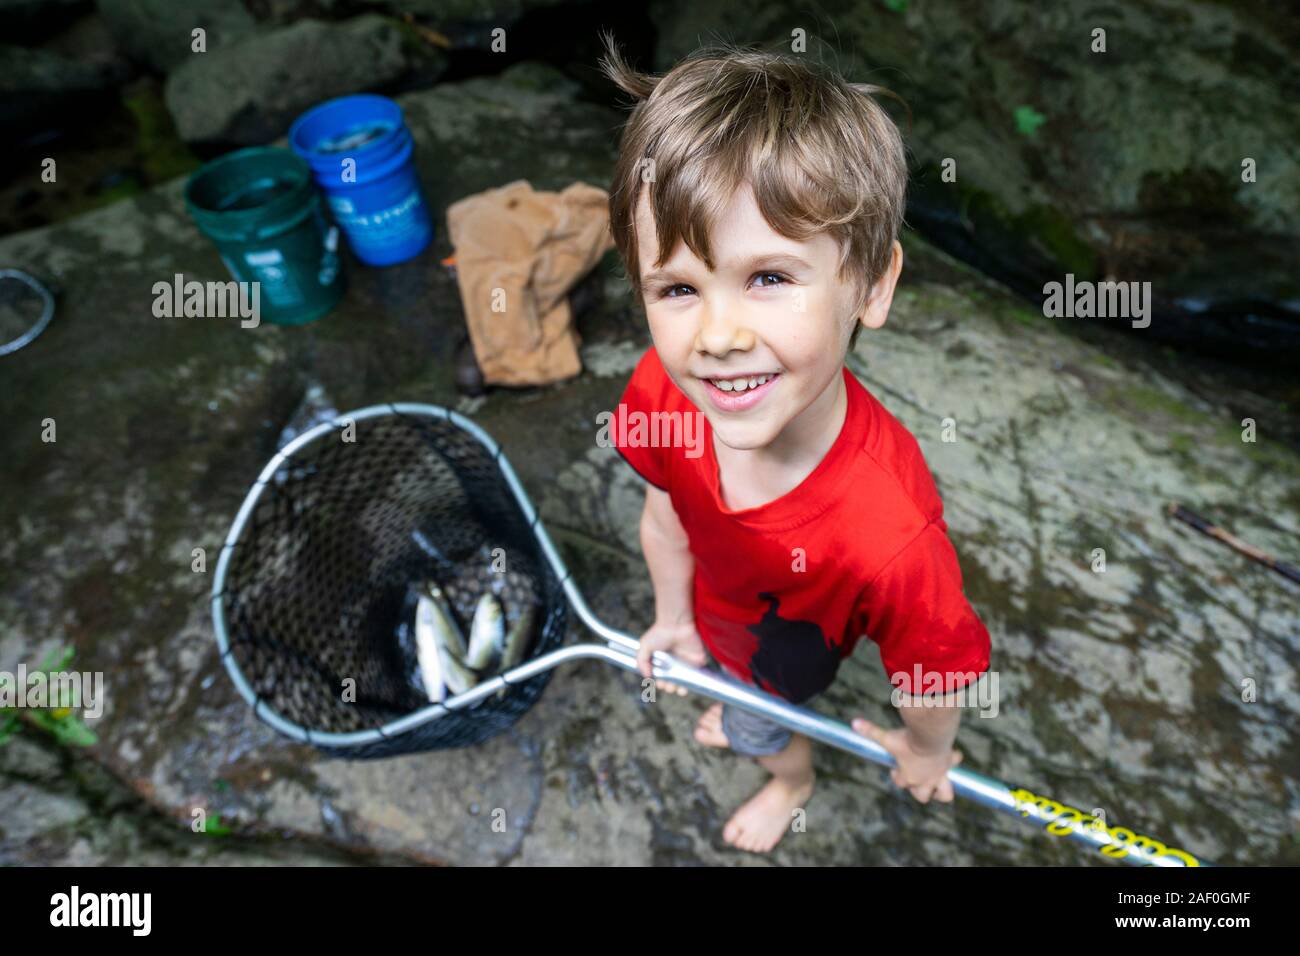 Young boy holding fishing net with fish Stock Photo